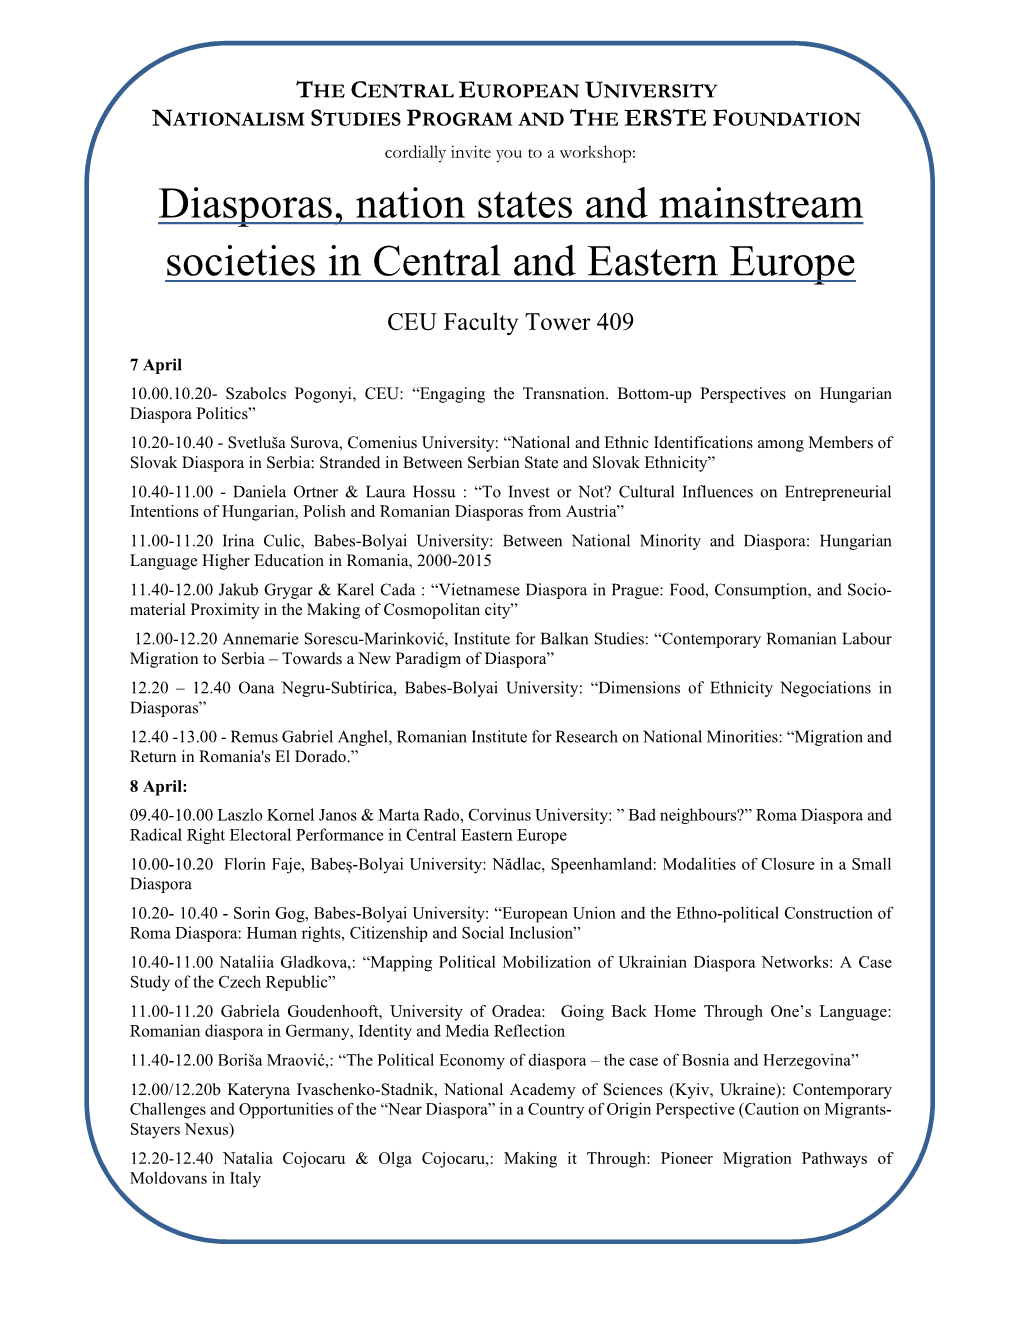 Diasporas, Nation States and Mainstream Societies in Central and Eastern Europe